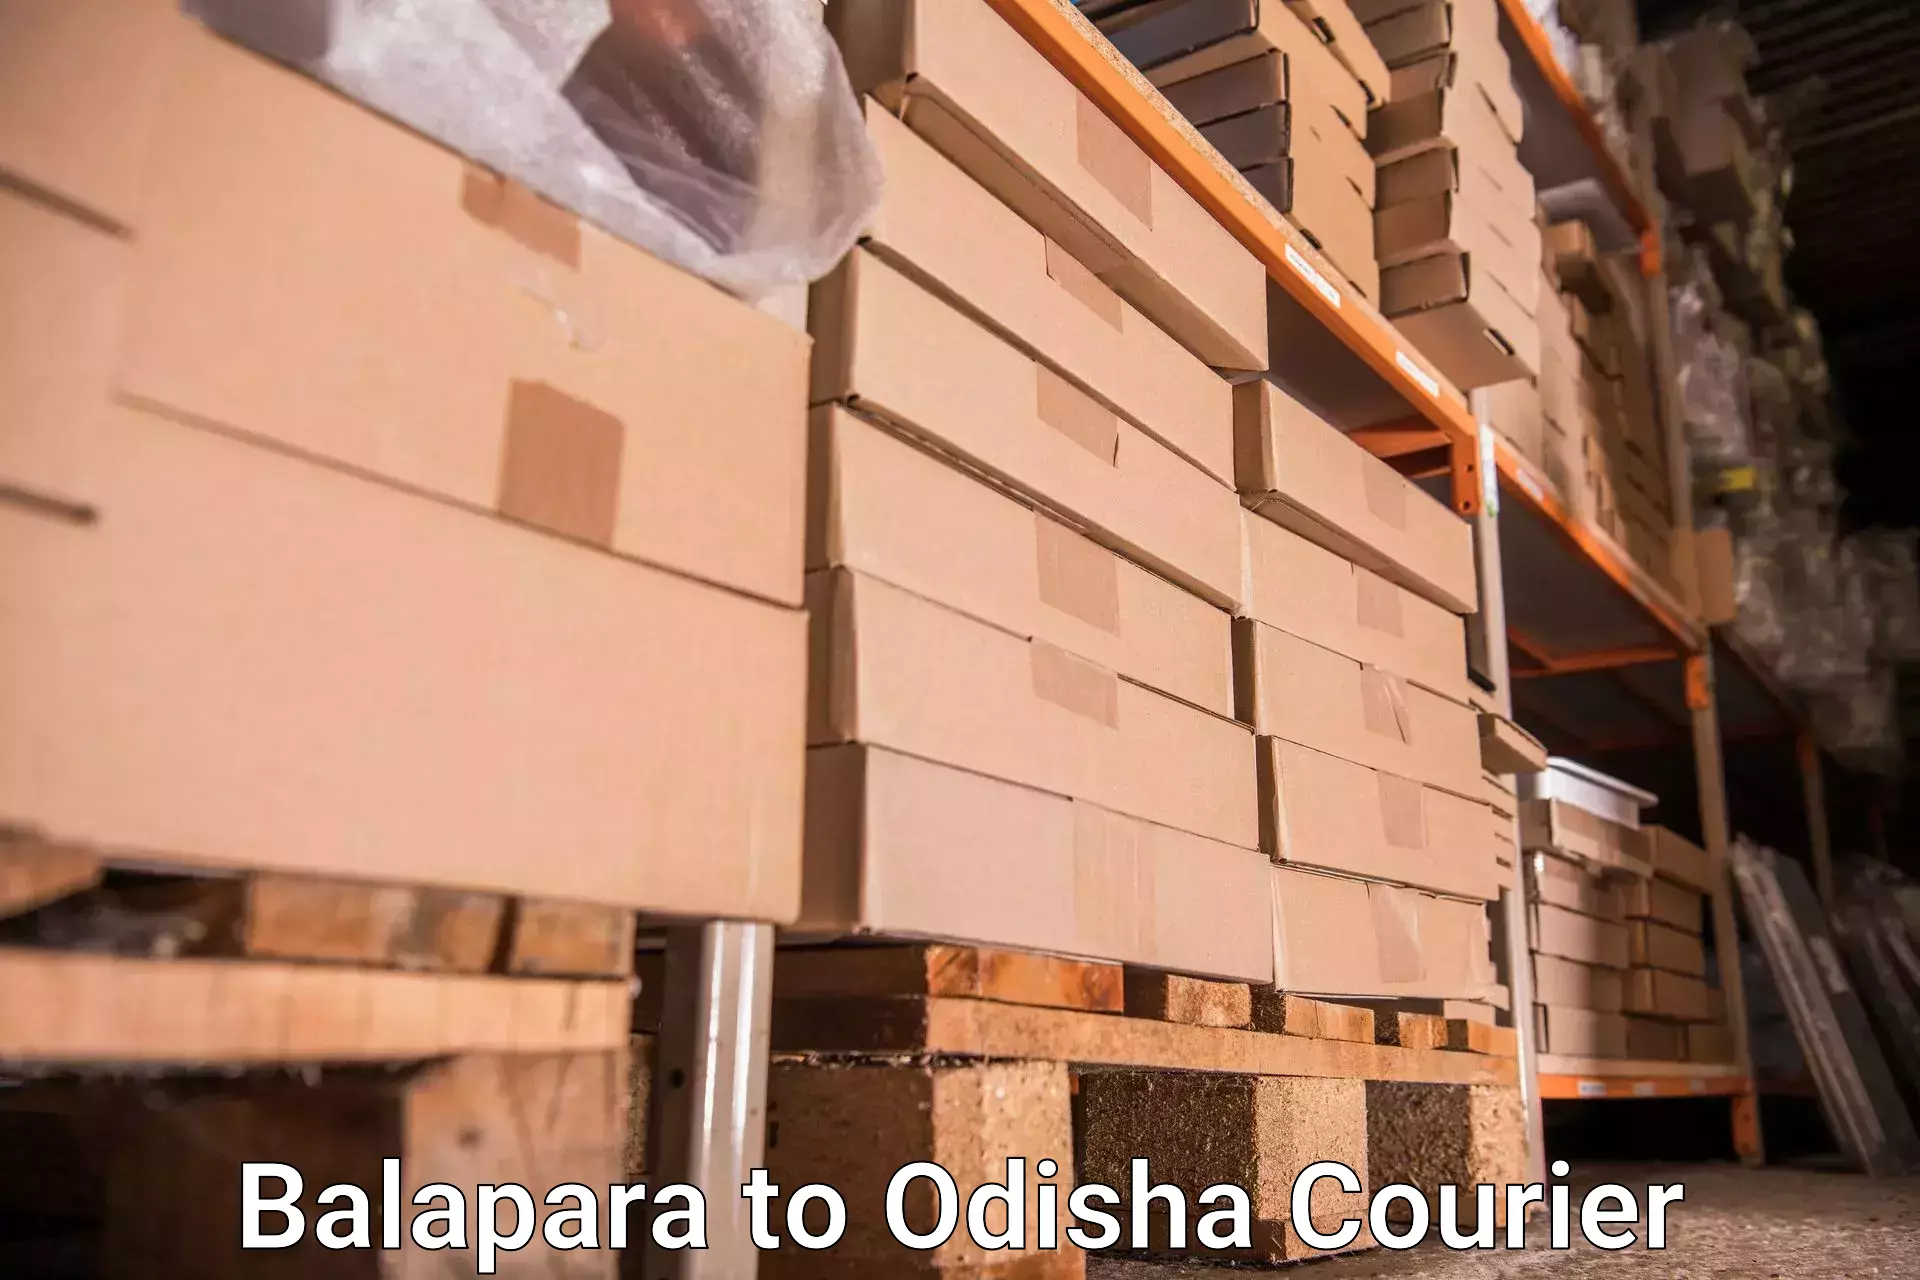 Personal effects shipping in Balapara to Riamal